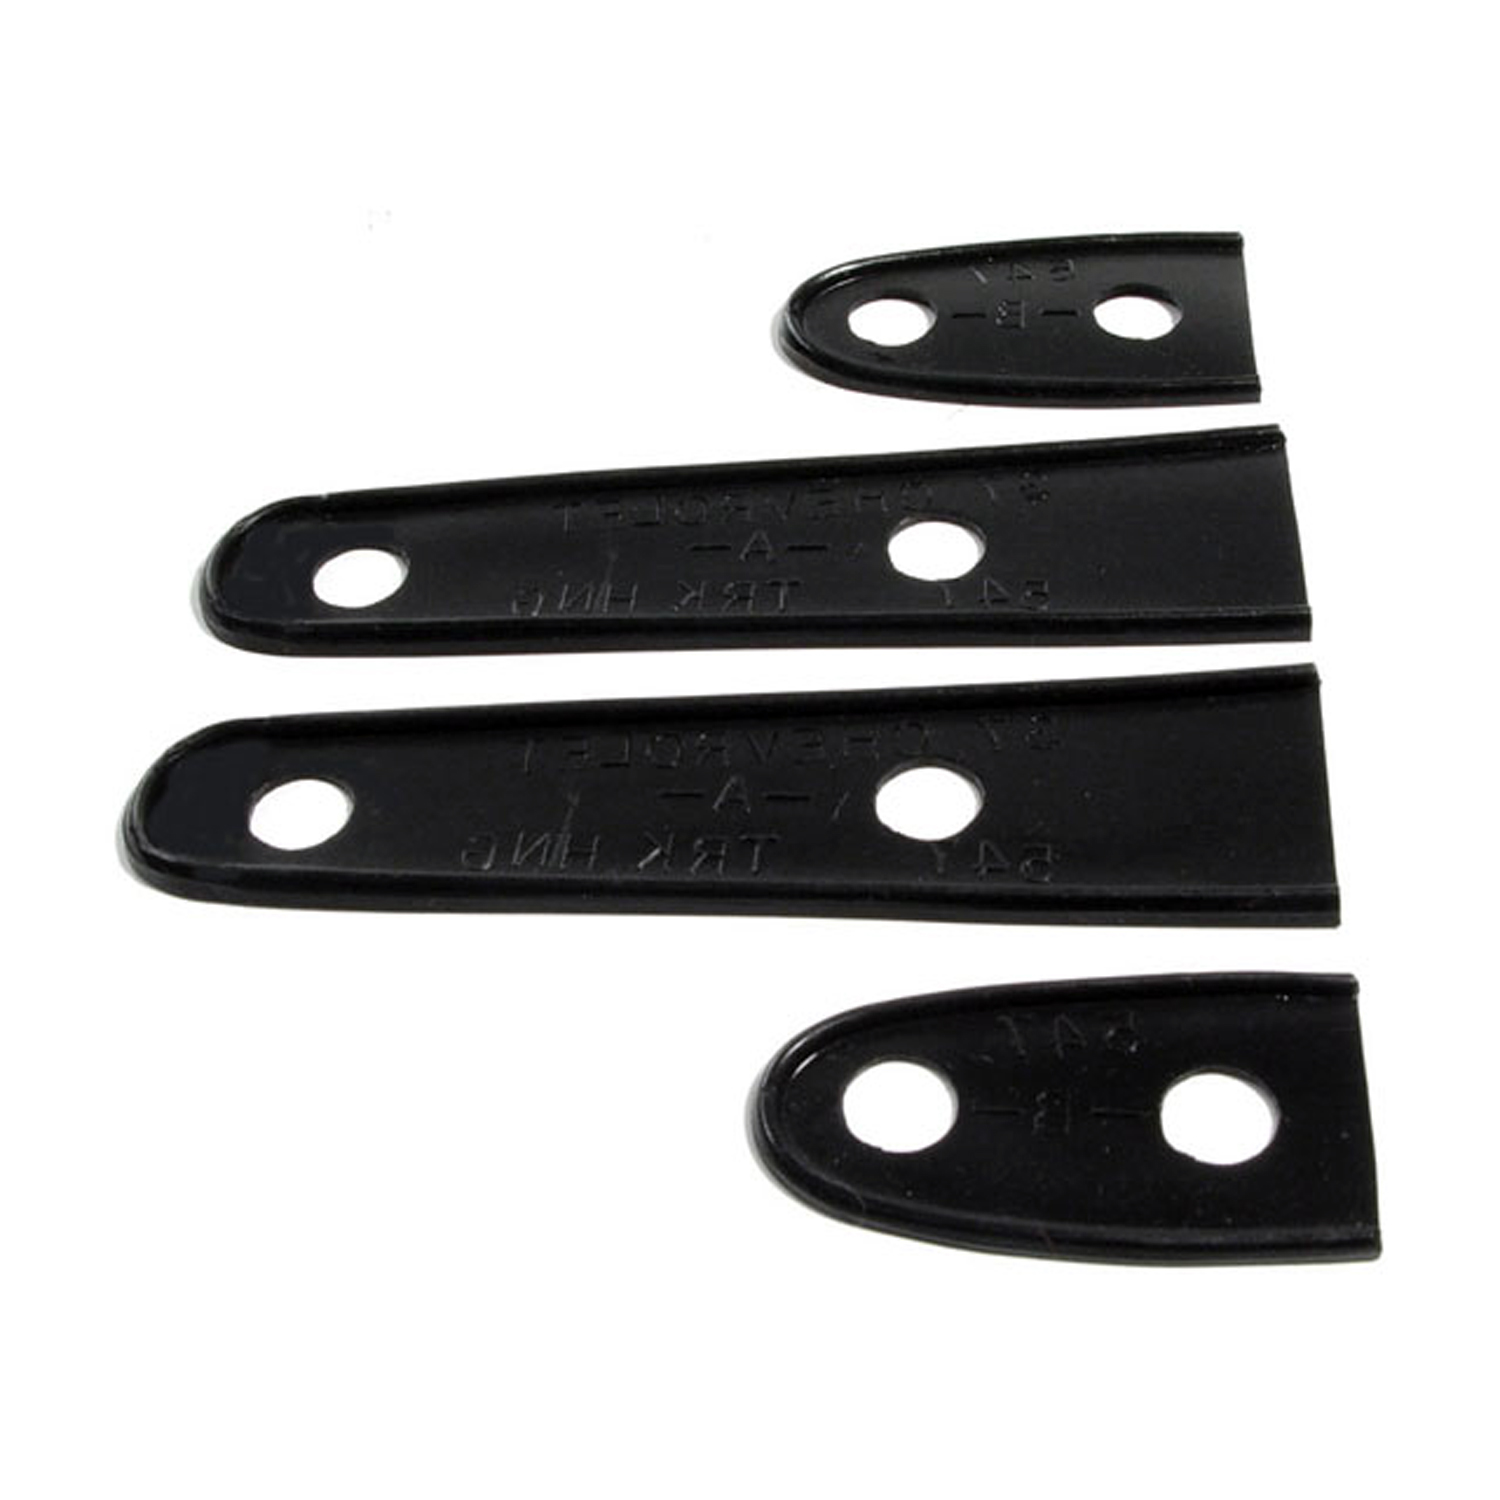 1937 Chevrolet Master Deluxe Trunk Hinge Pads.  1-3/8 wide X 7-3/4 long.  4-Piece Set-MP 547